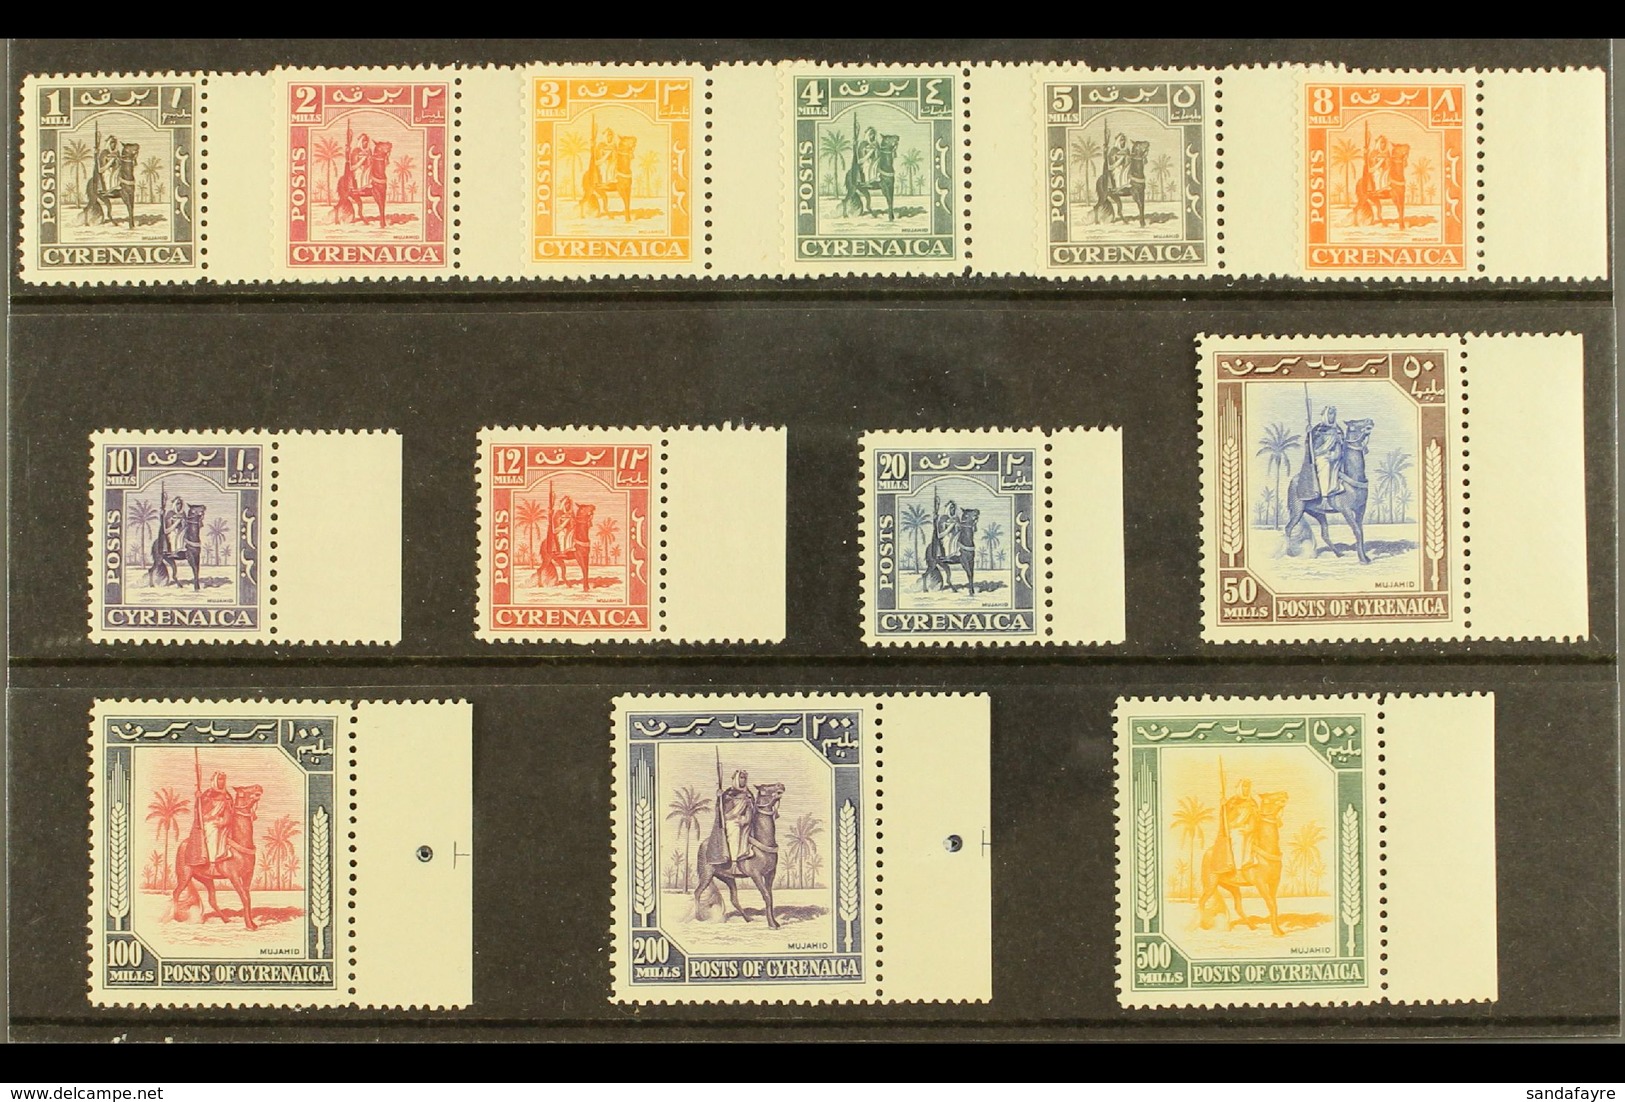 CYRENAICA 1950 "Mounted Warrior" Definitives Complete Set, SG 136/48, Very Fine Never Hinged Mint Matching Marginal Exam - Italian Eastern Africa